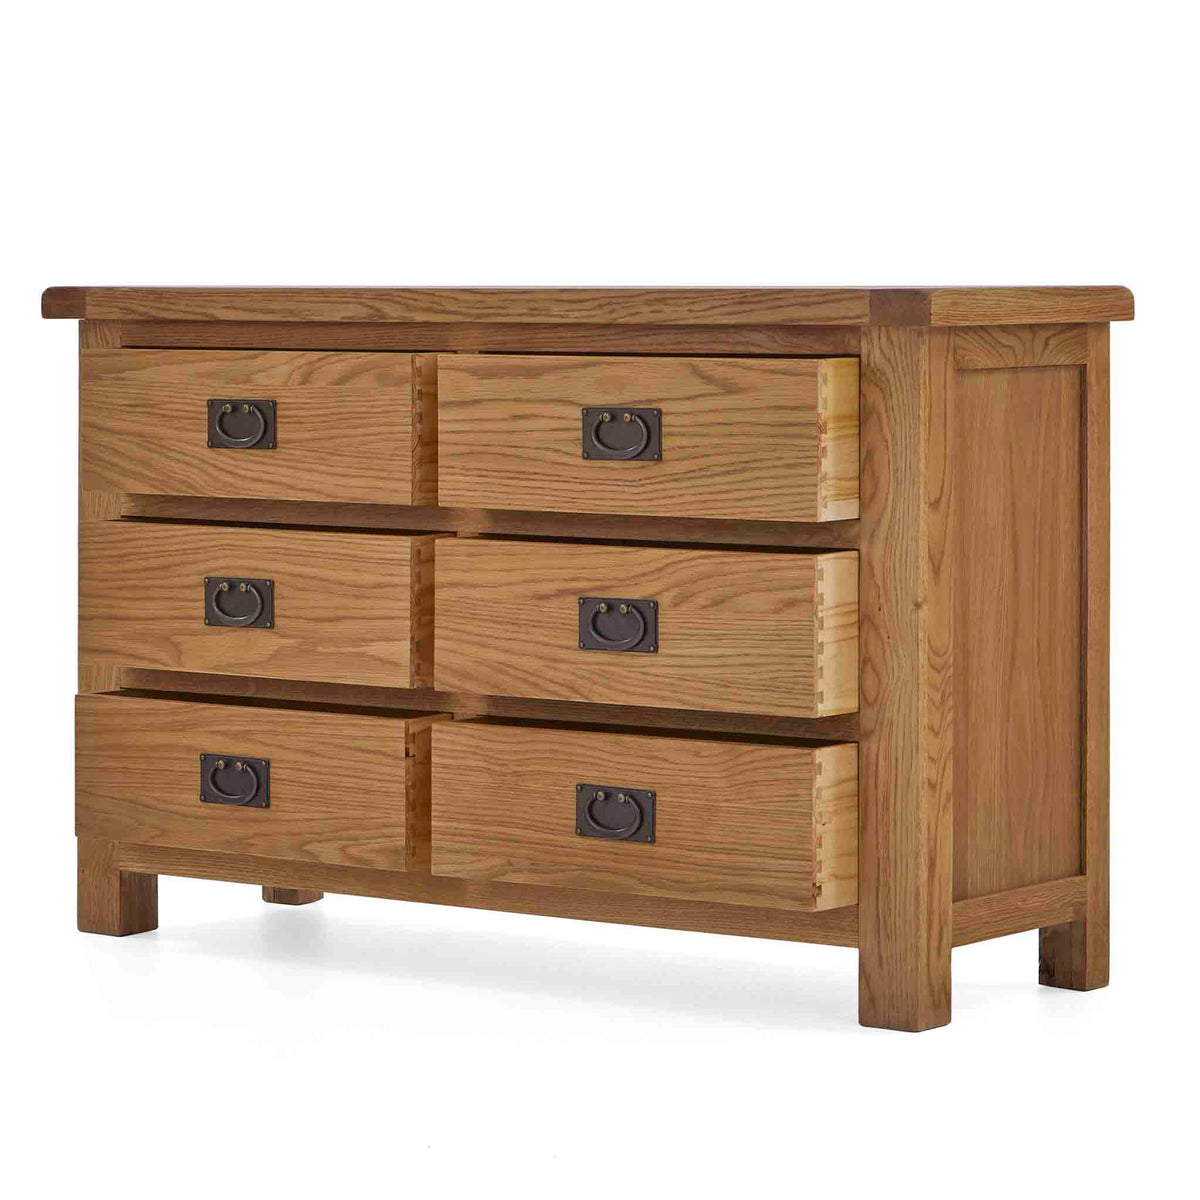 Zelah Oak 3+3 Drawer Chest of Drawers - Side view with drawers open